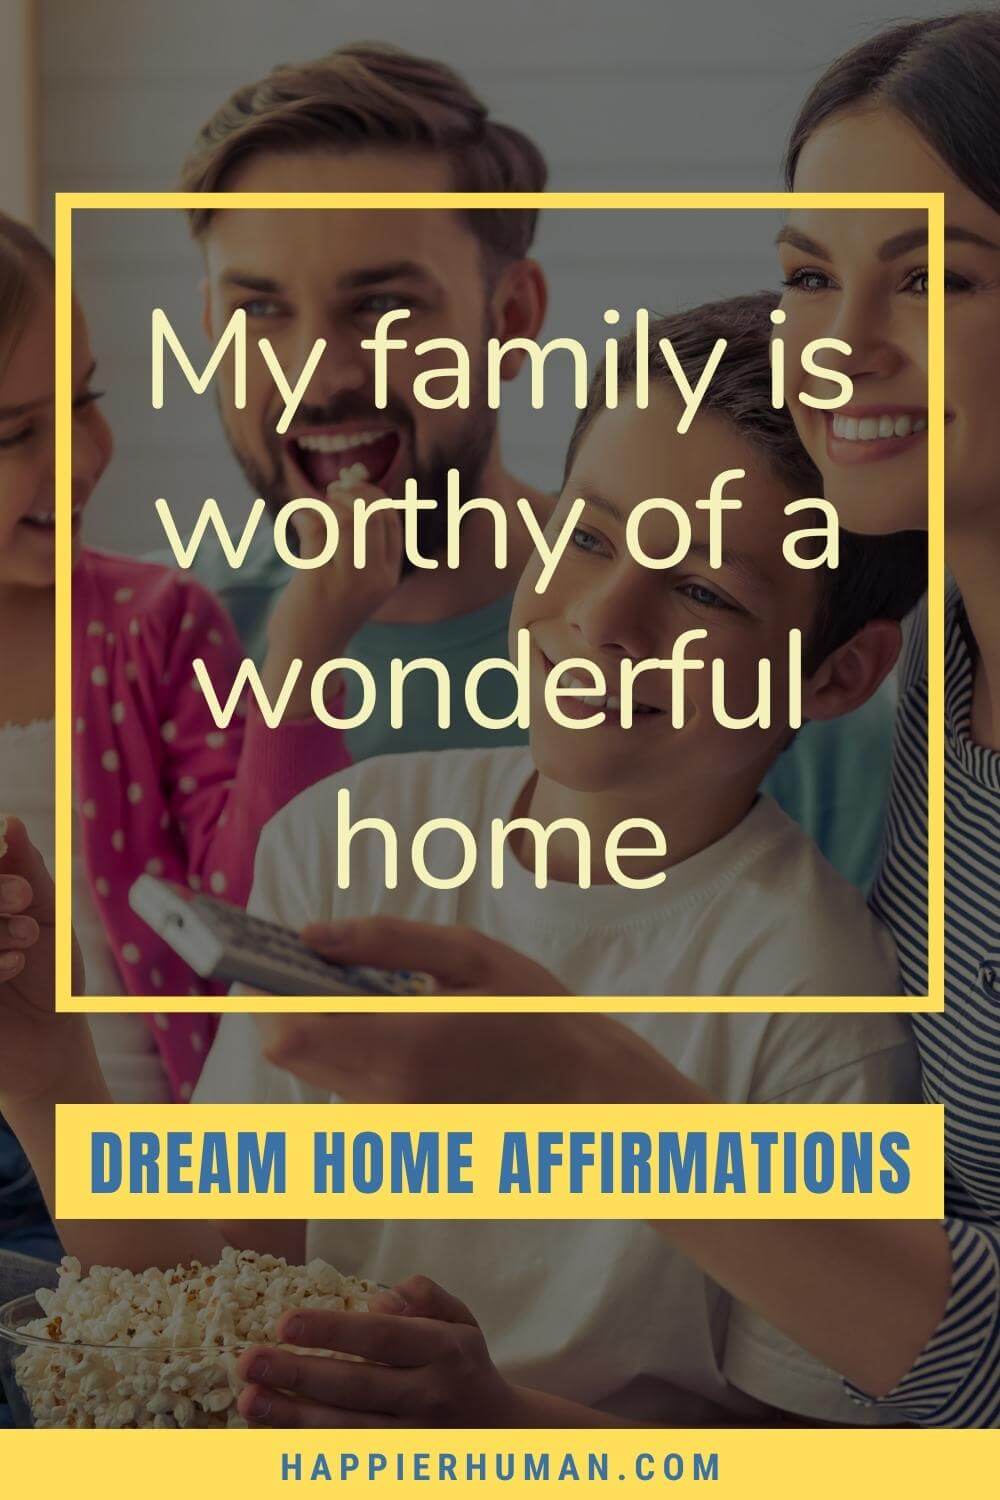 Dream Home Affirmations - My family is worthy of a wonderful home | clean home affirmations | affirmations for family | positive affirmations